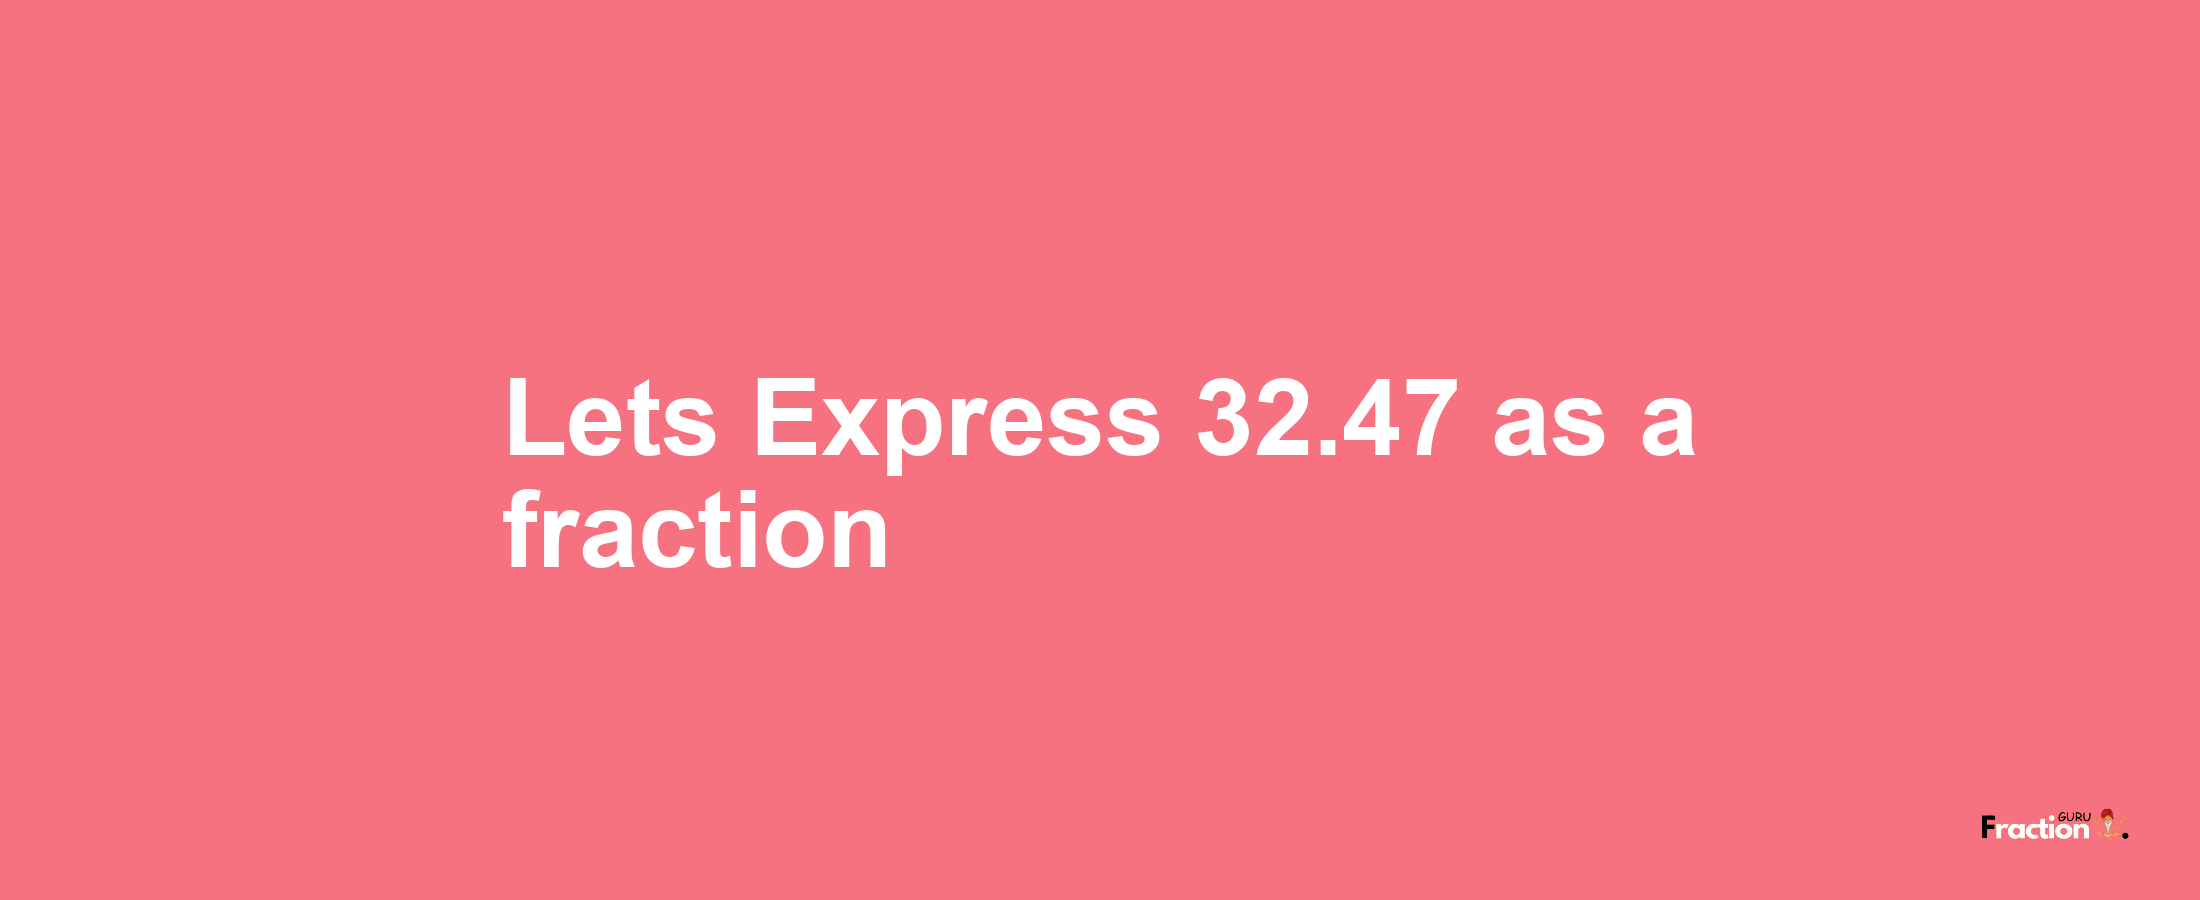 Lets Express 32.47 as afraction